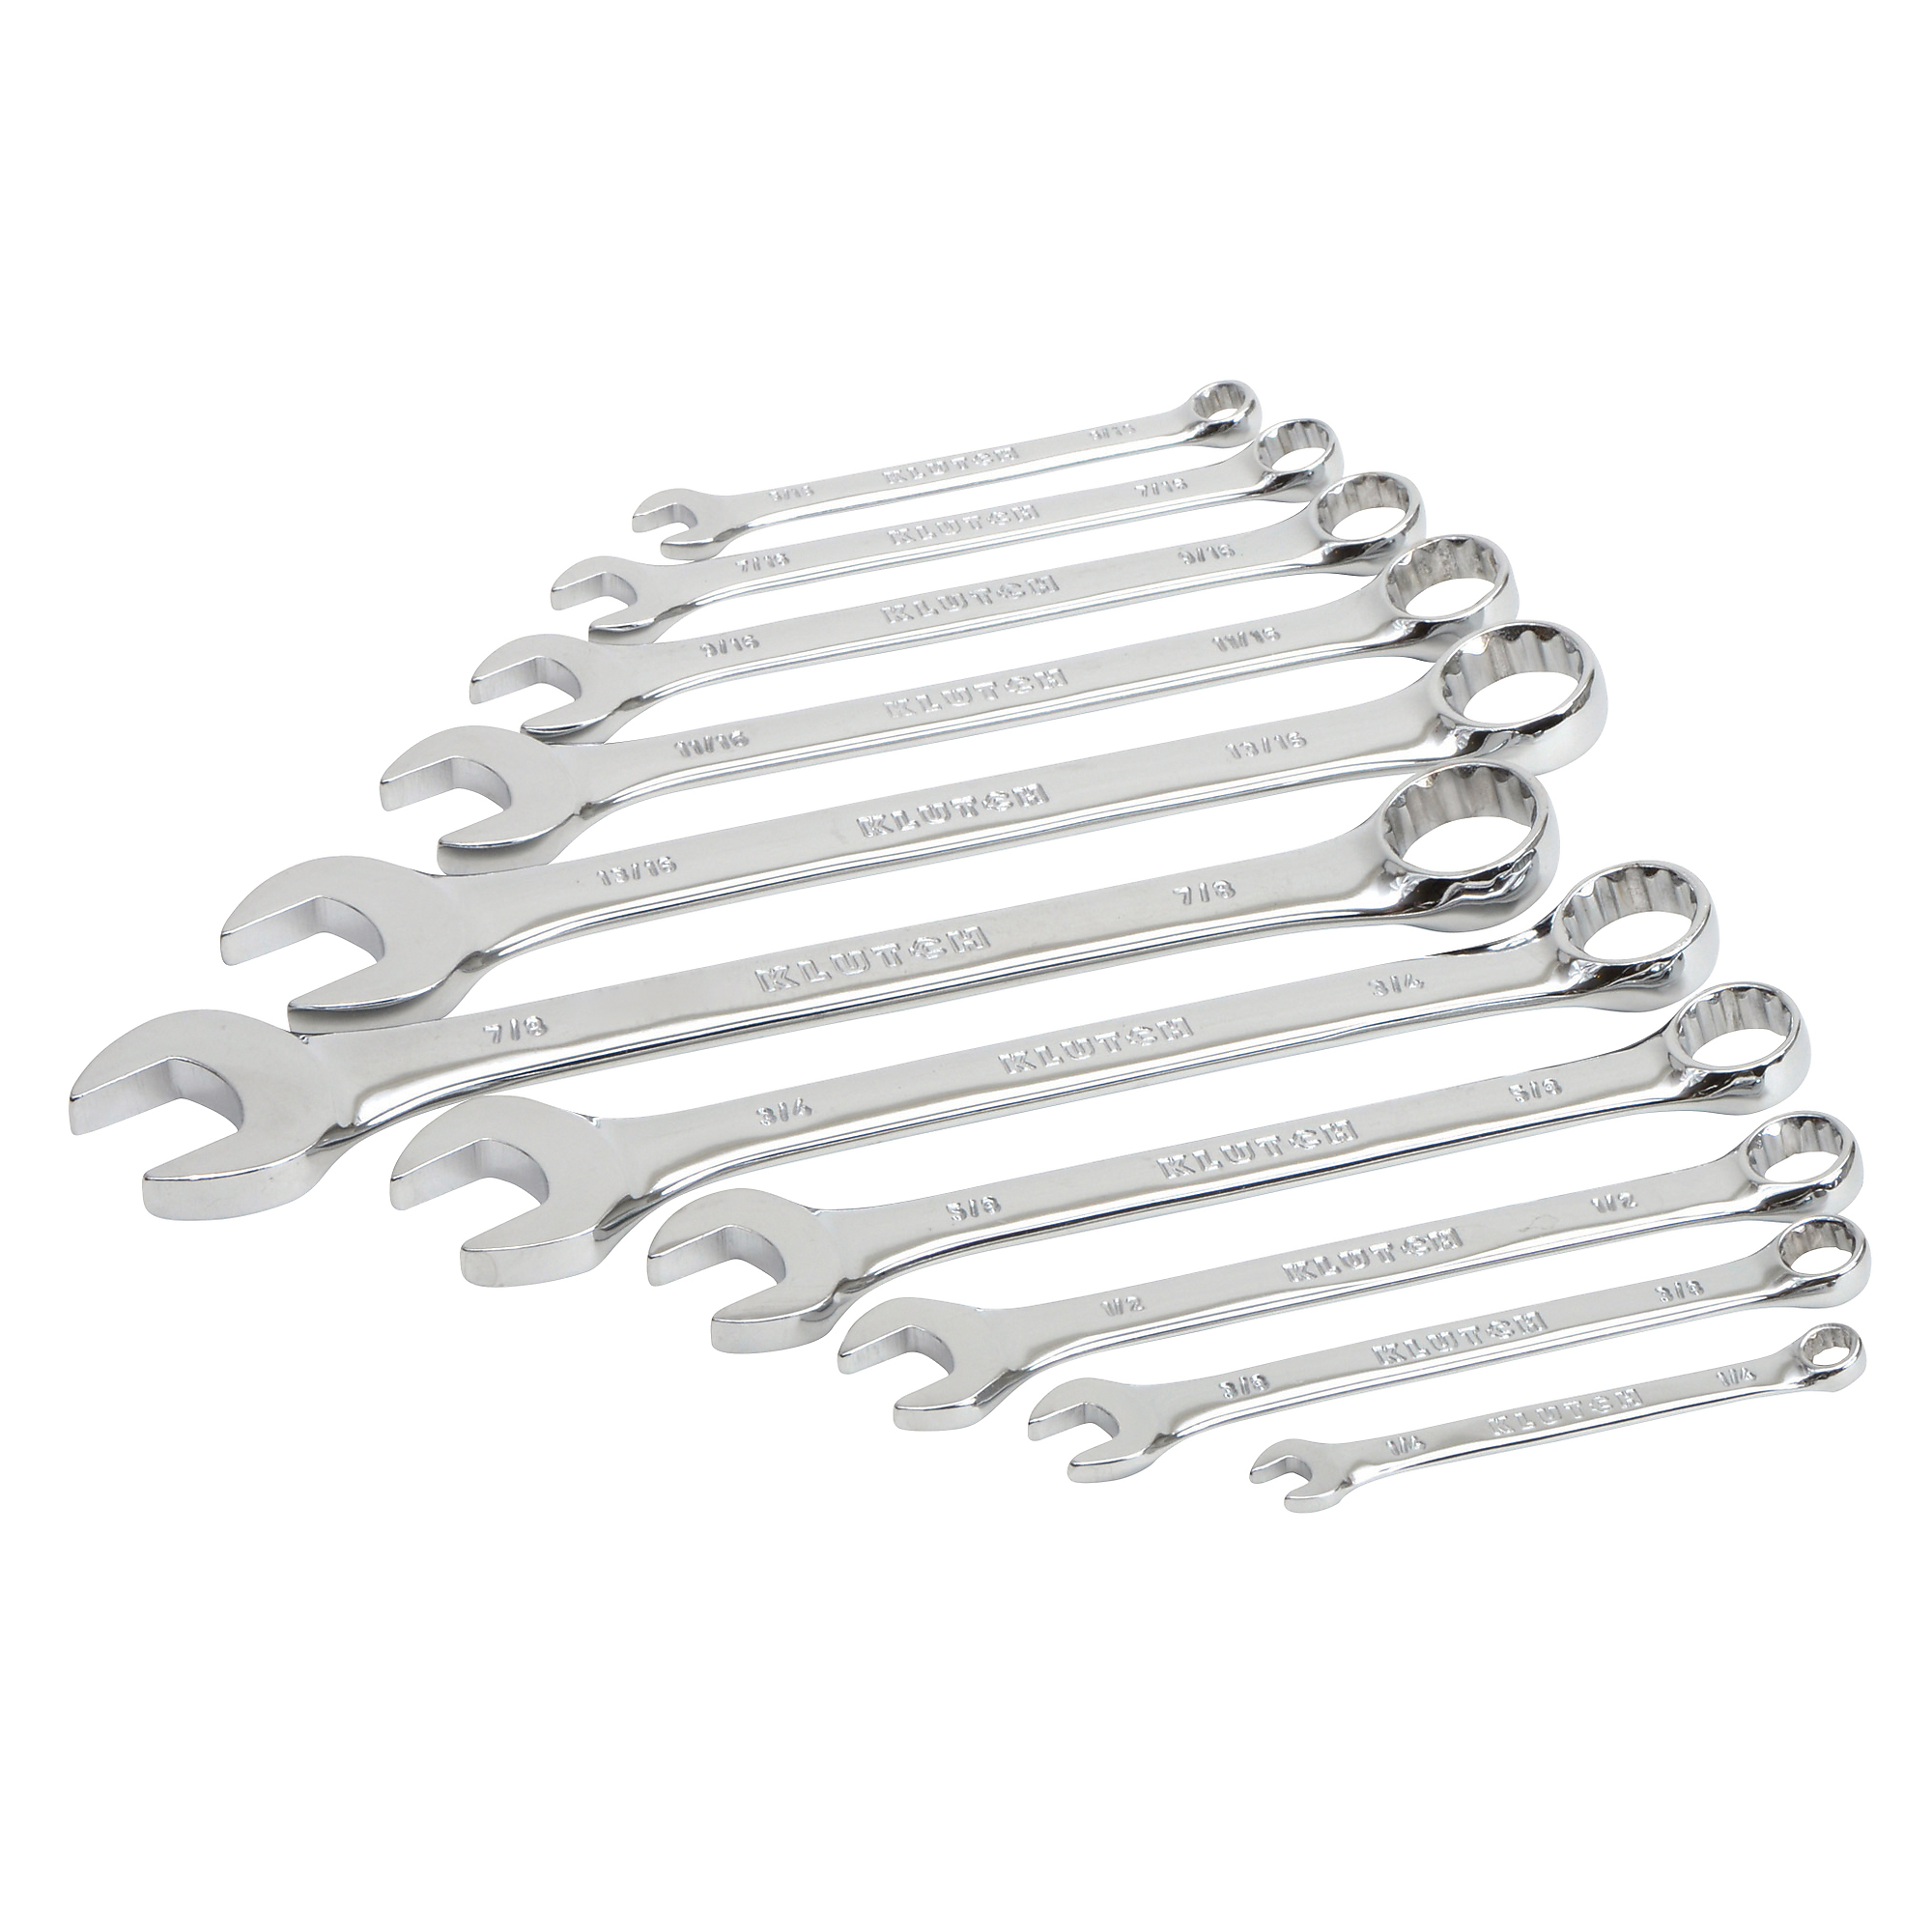 Klutch 11-Piece SAE Wrench Set with Full Polish, Model E-2004